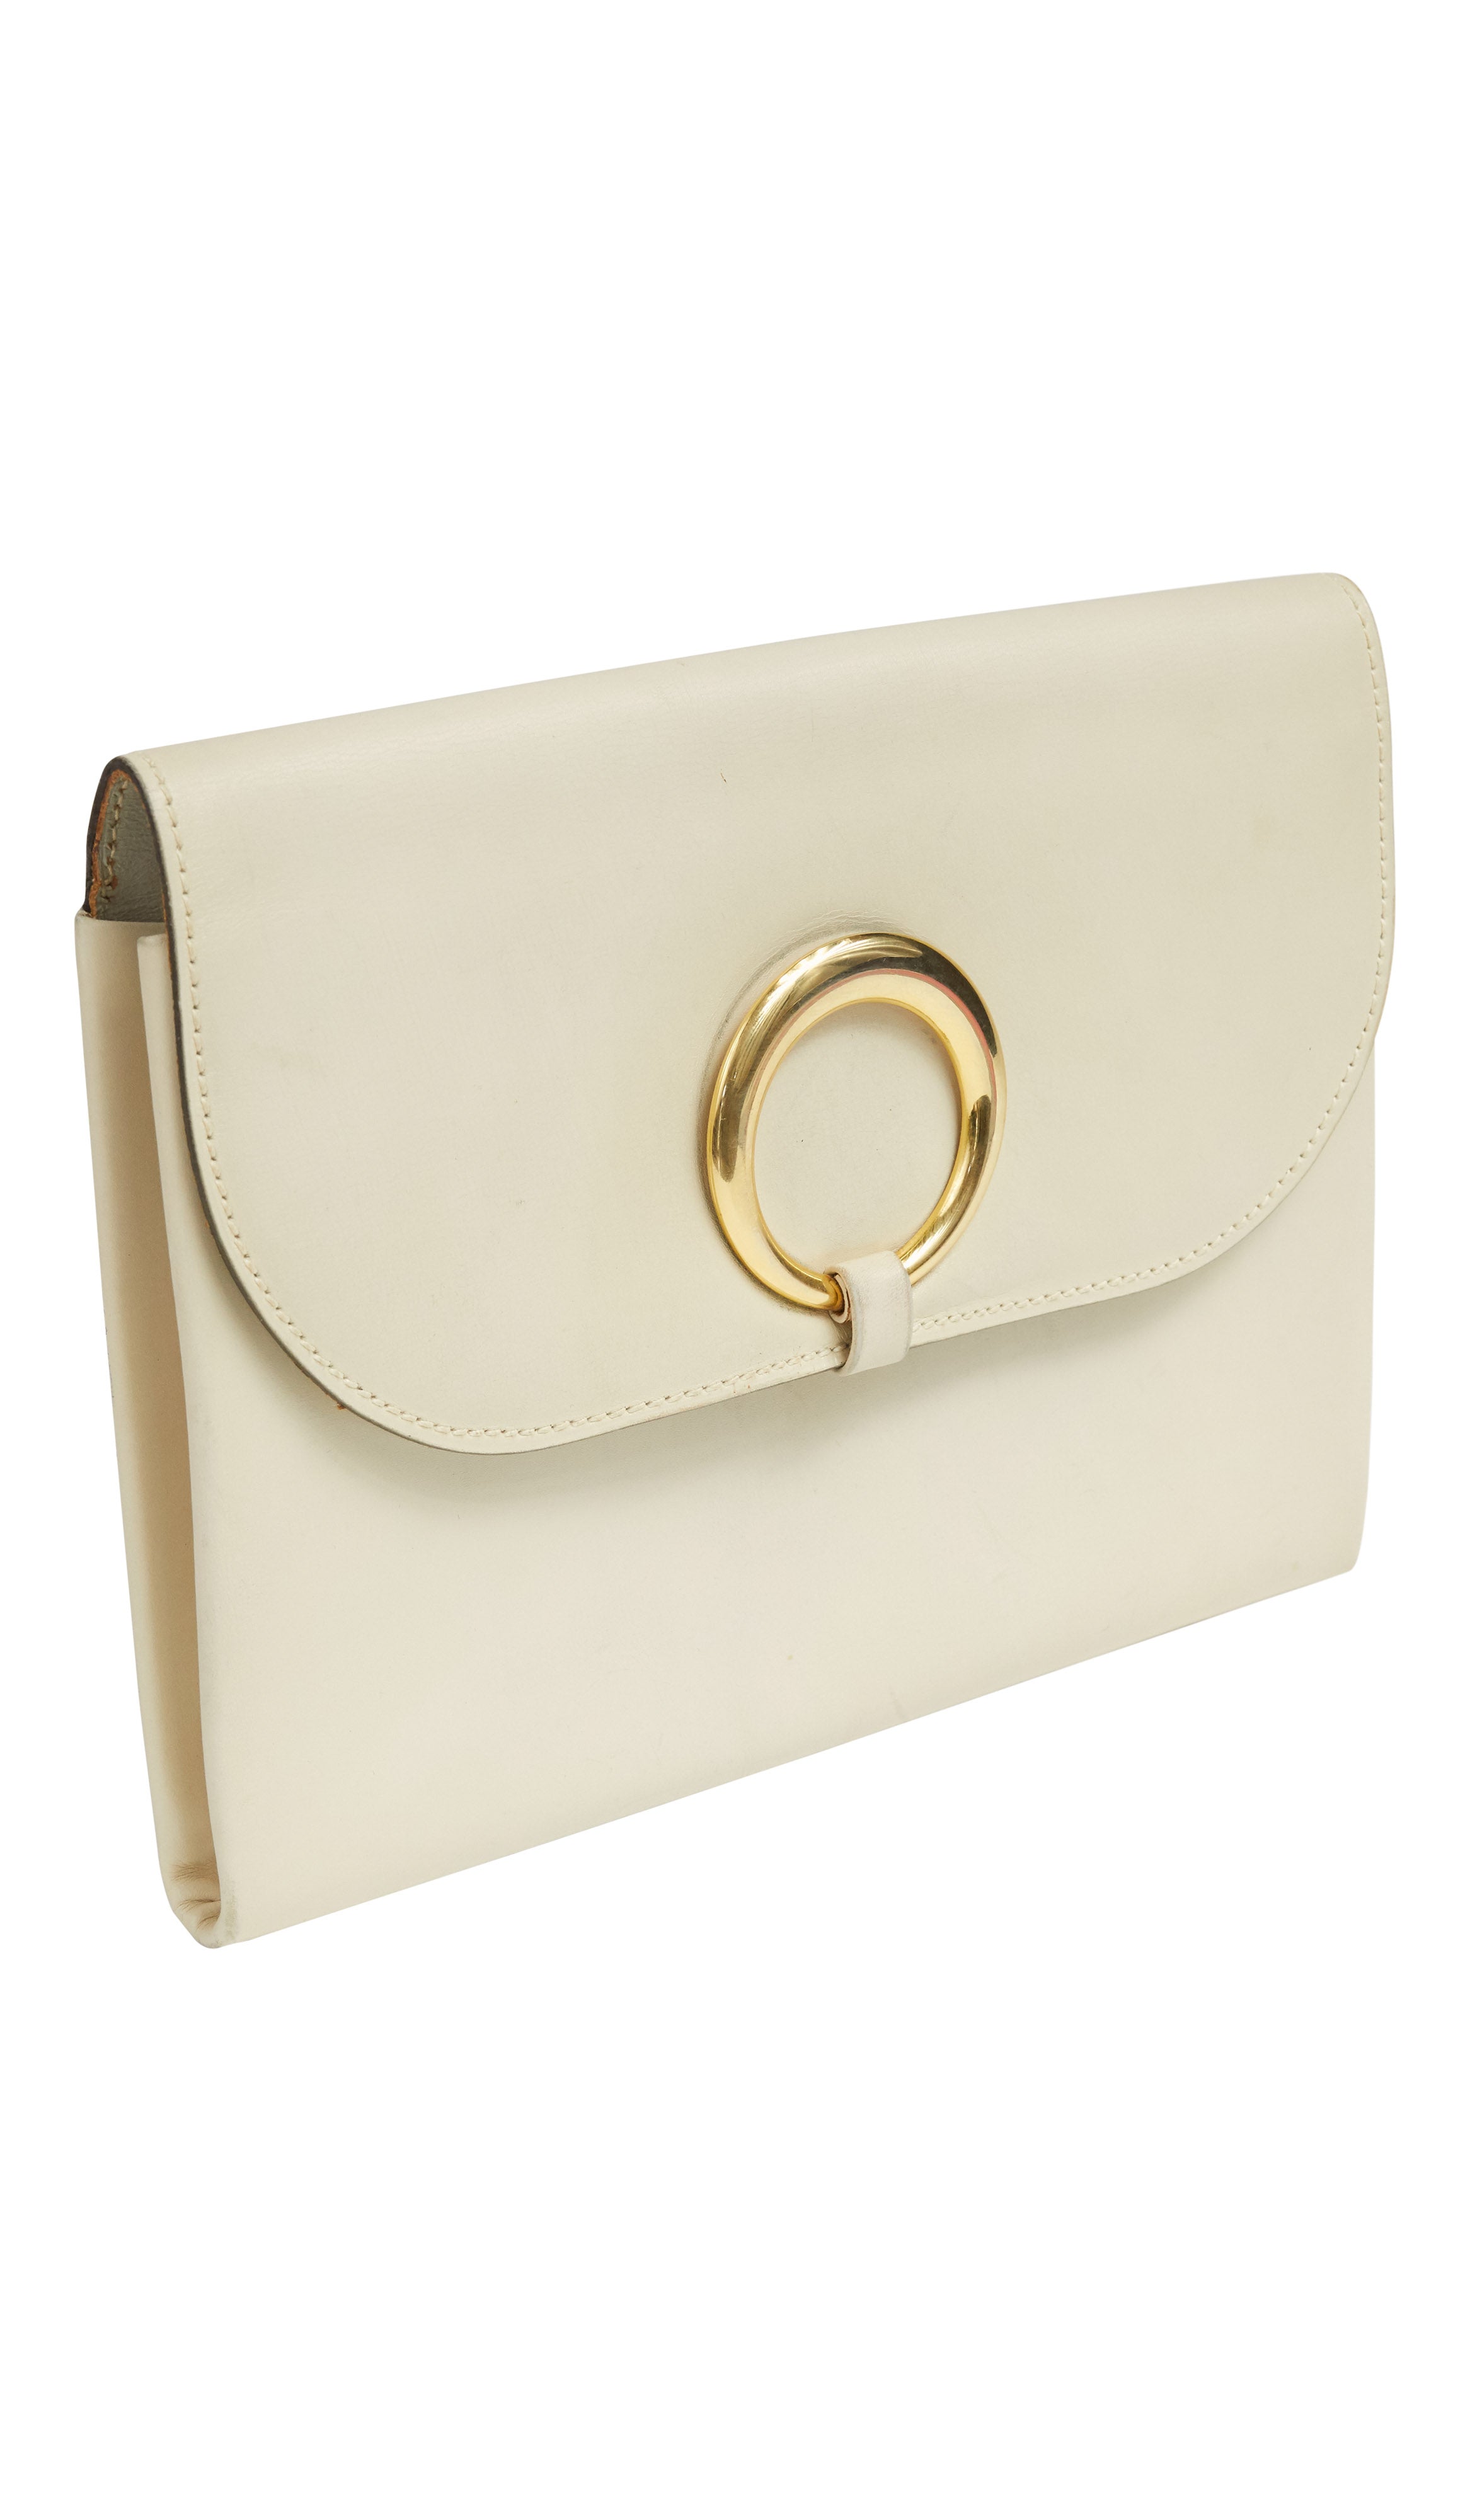 Leather Envelope Clutch — MADE GREAT IN